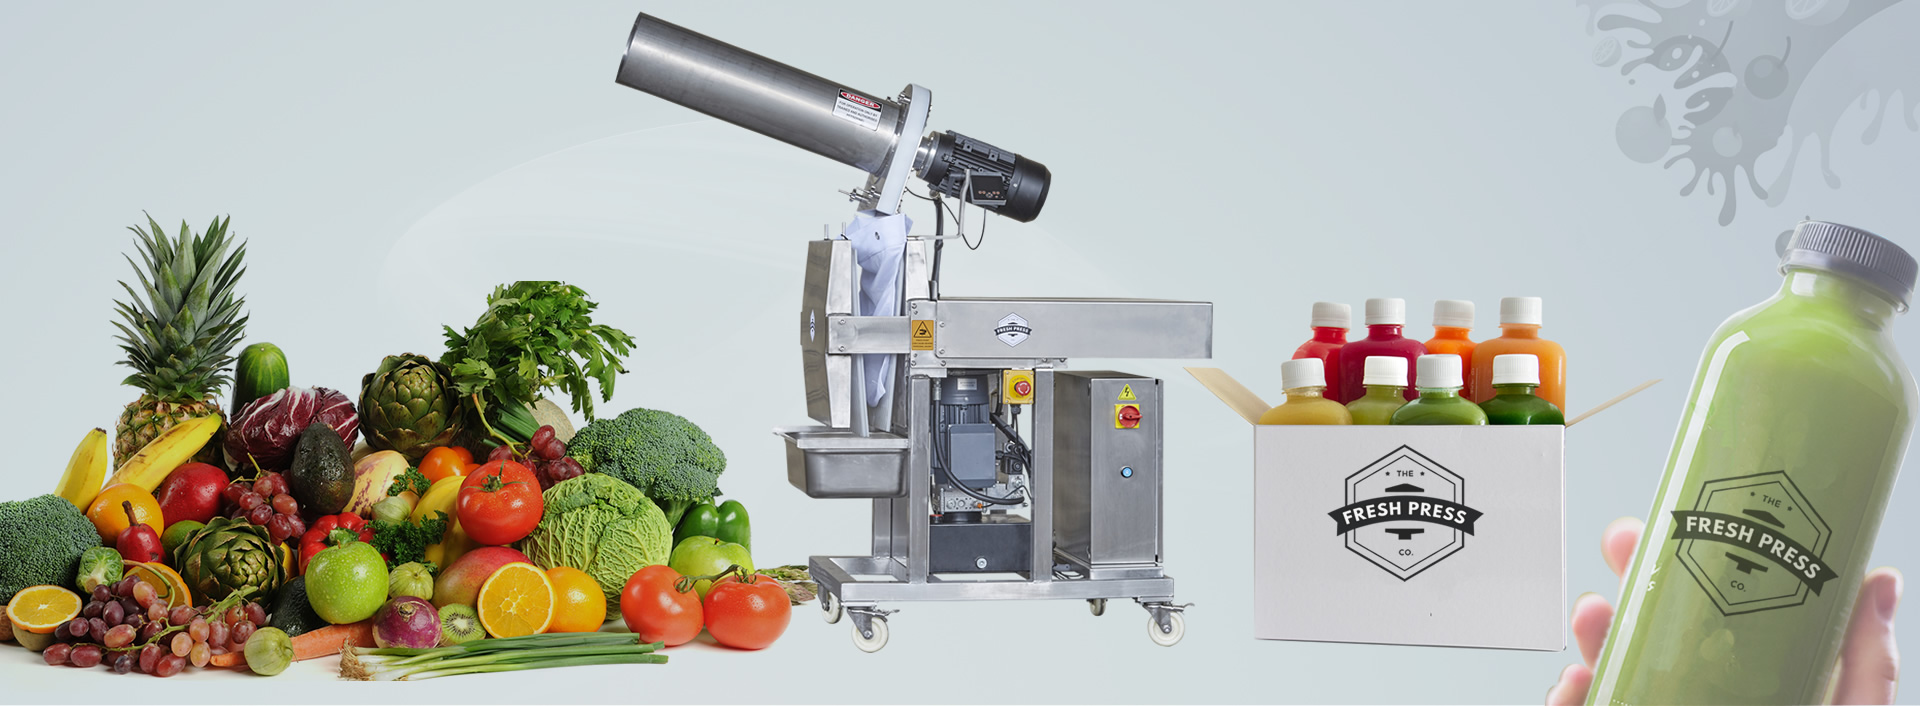 Juiced Rite M75 Commercial Cold Press Juicer - Plant Based Pros